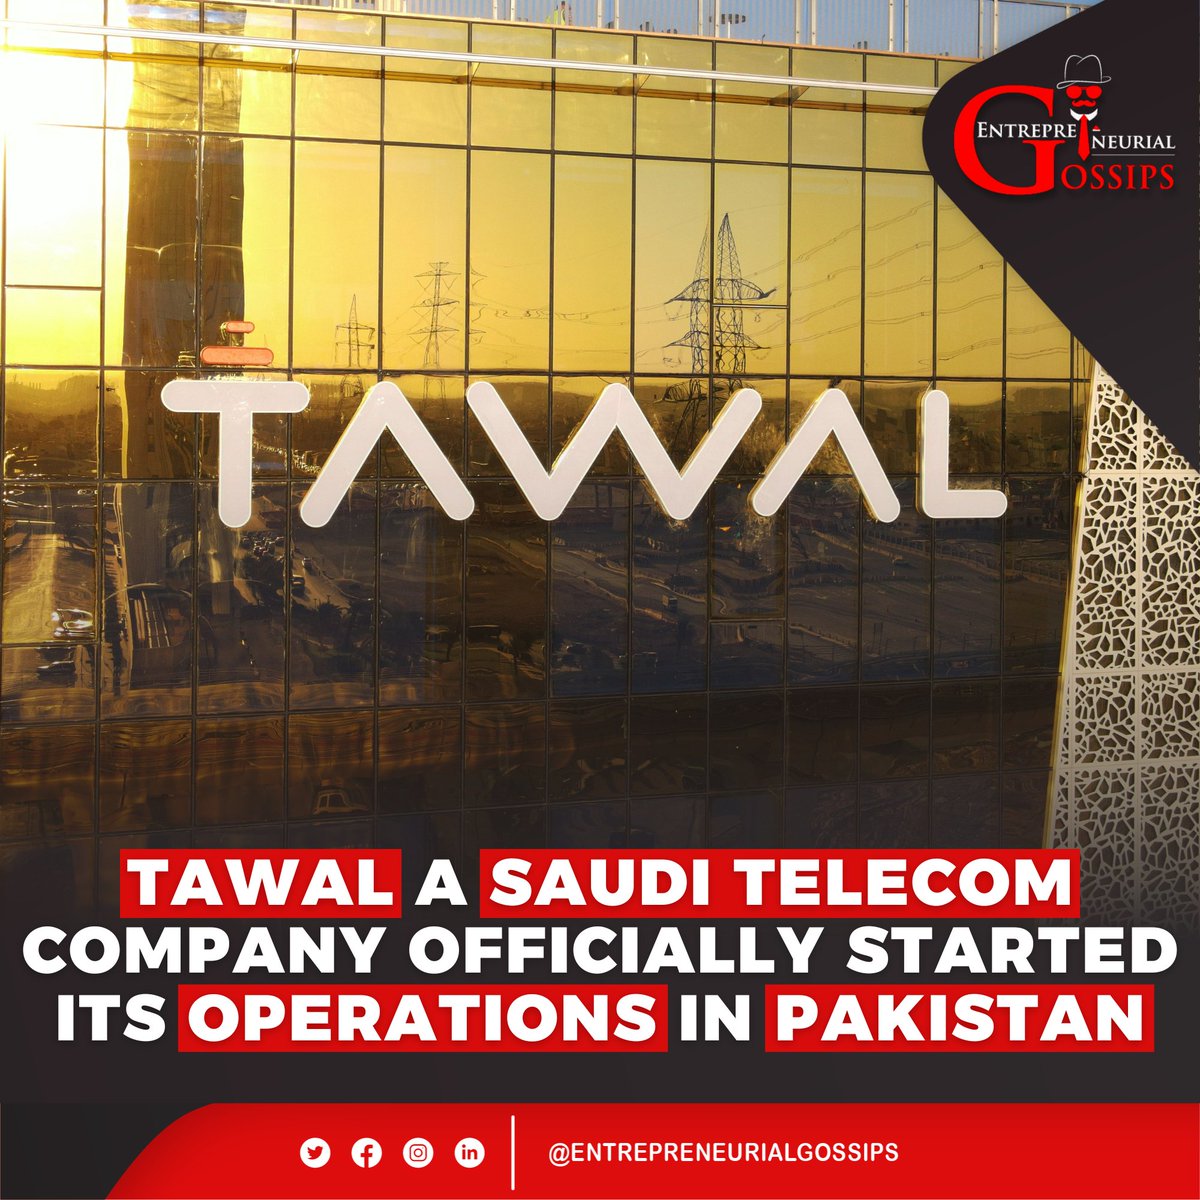 Tawal a Saudi telecom company officially started its operations in Pakistan.

#entrepreneurialgossips #Tawal #saudi #telecommunications #telecom #pakistan #entrepreneurs #entrepreneurship #EmpoweringPakistanFuture #empoweringpakistanfuture #EmergingPakistan